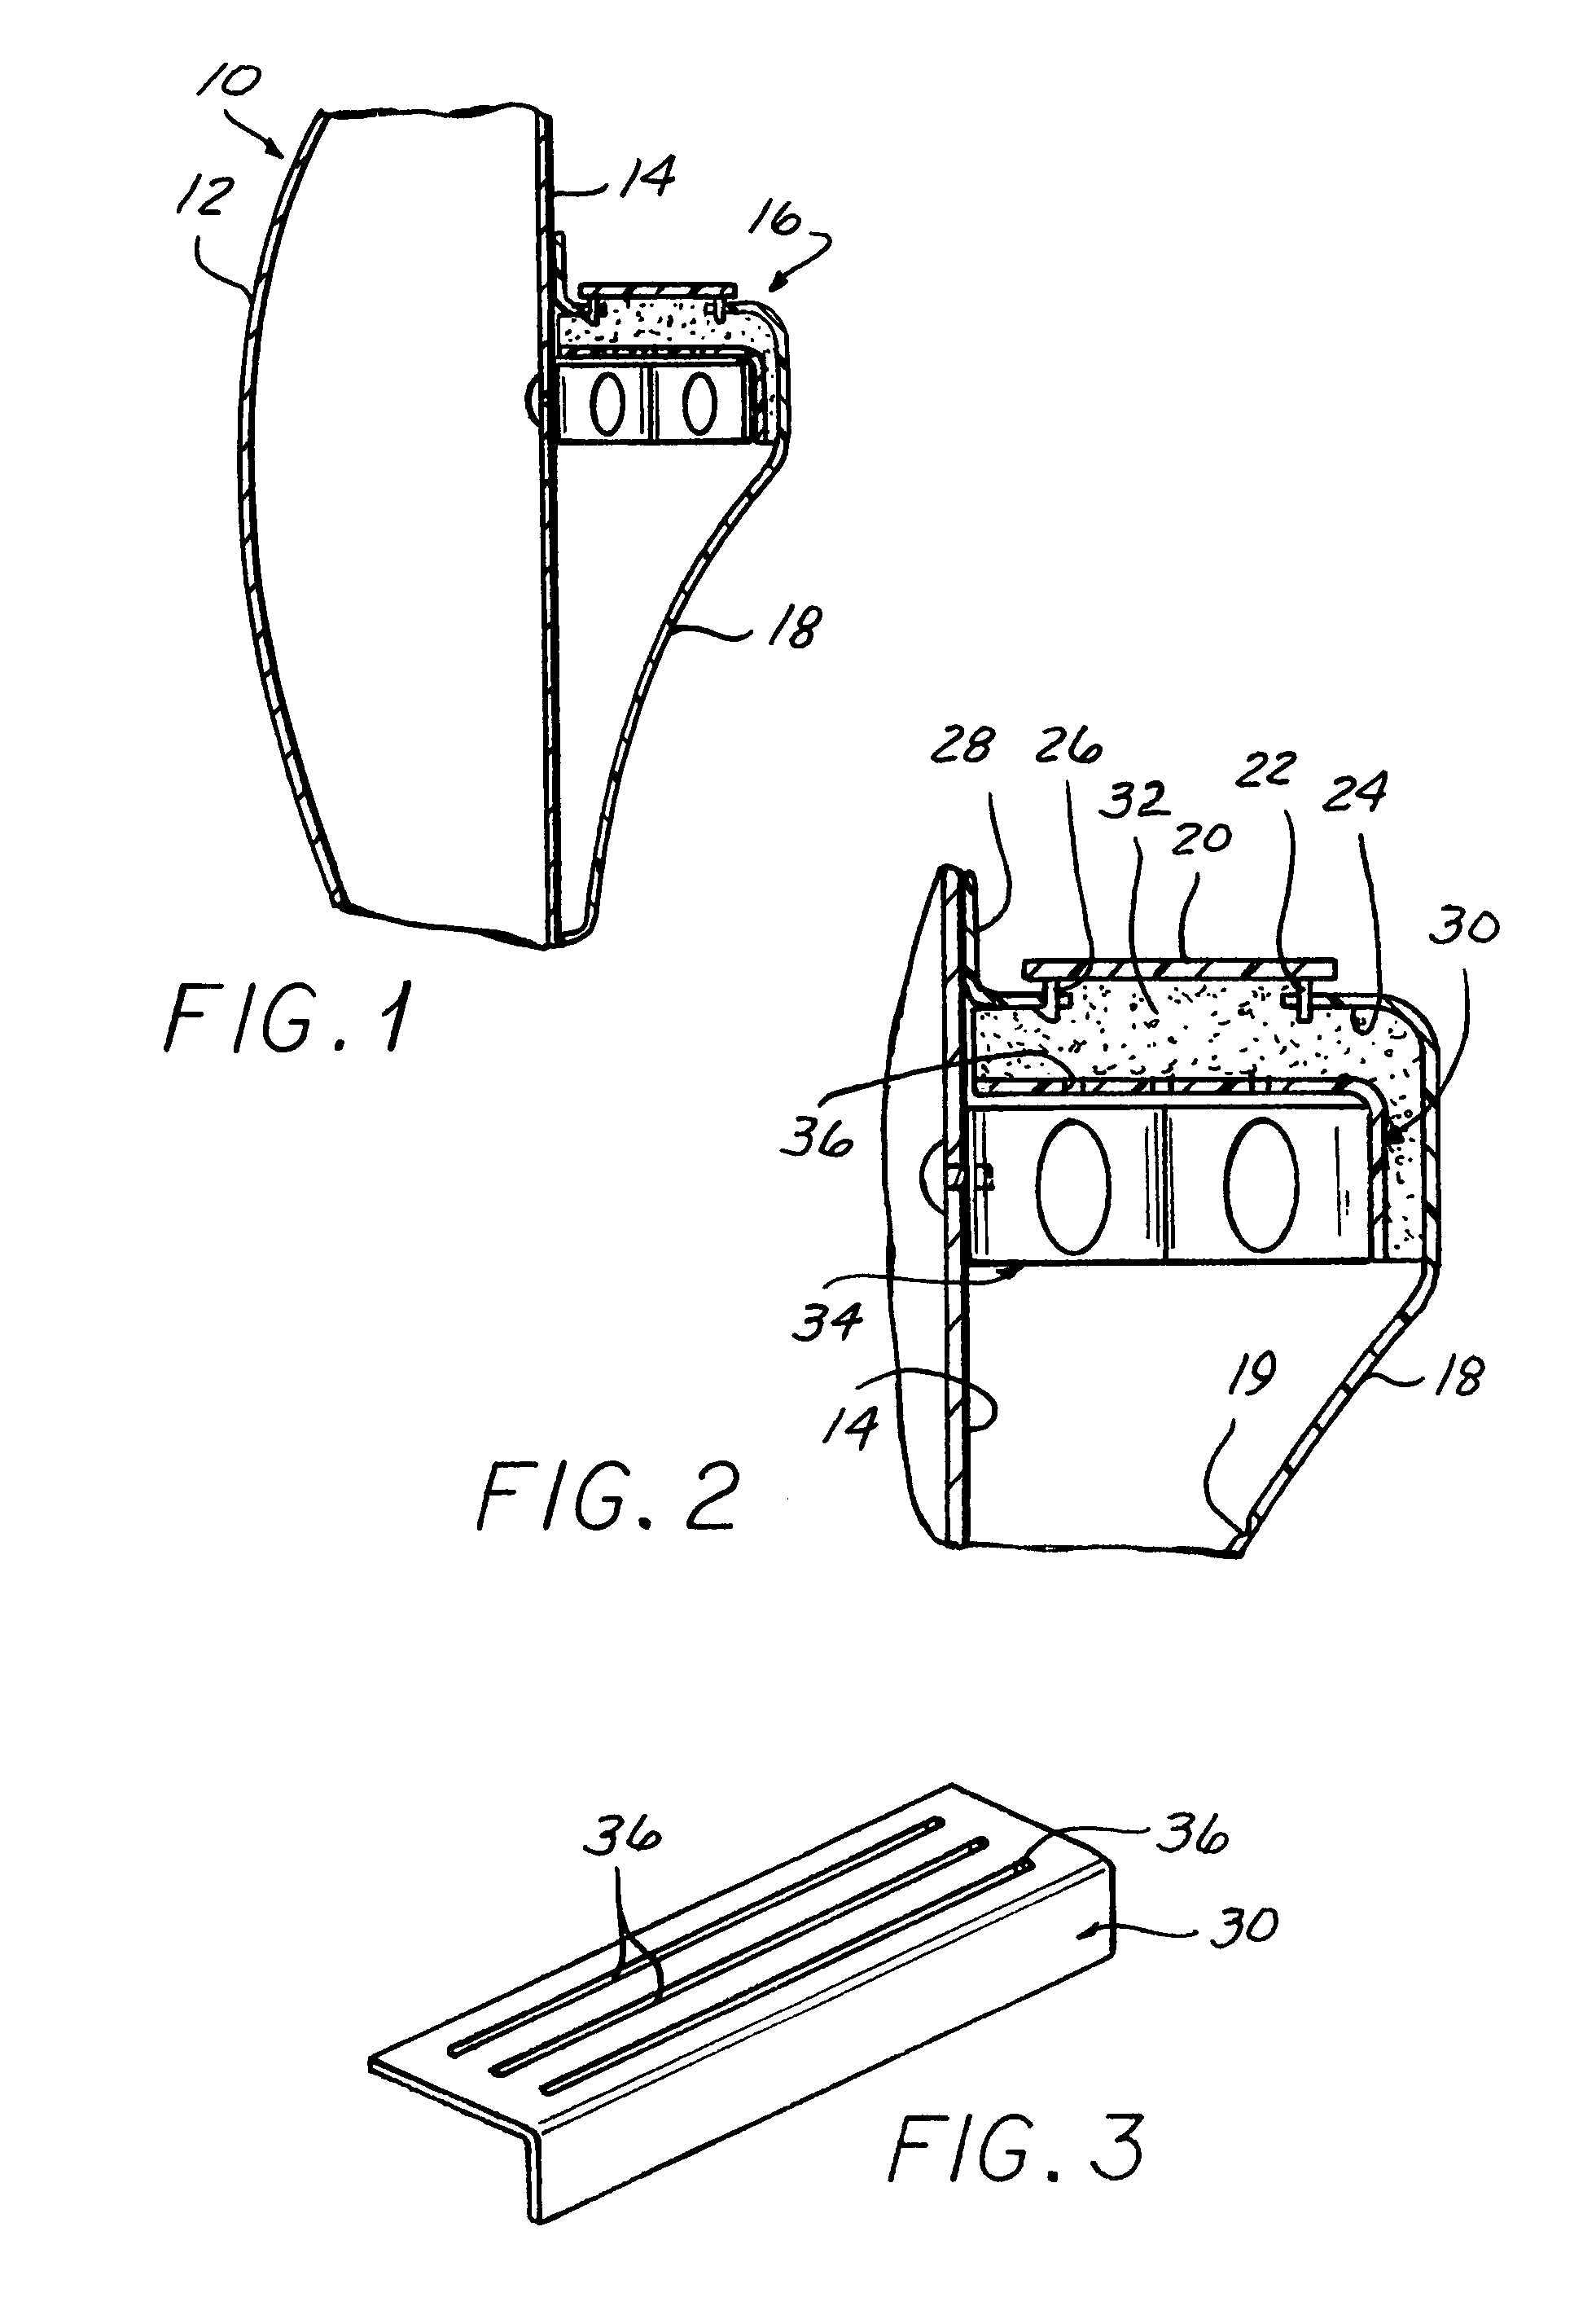 Crushable armrest and pelvic structures for motor vehicle side impacts